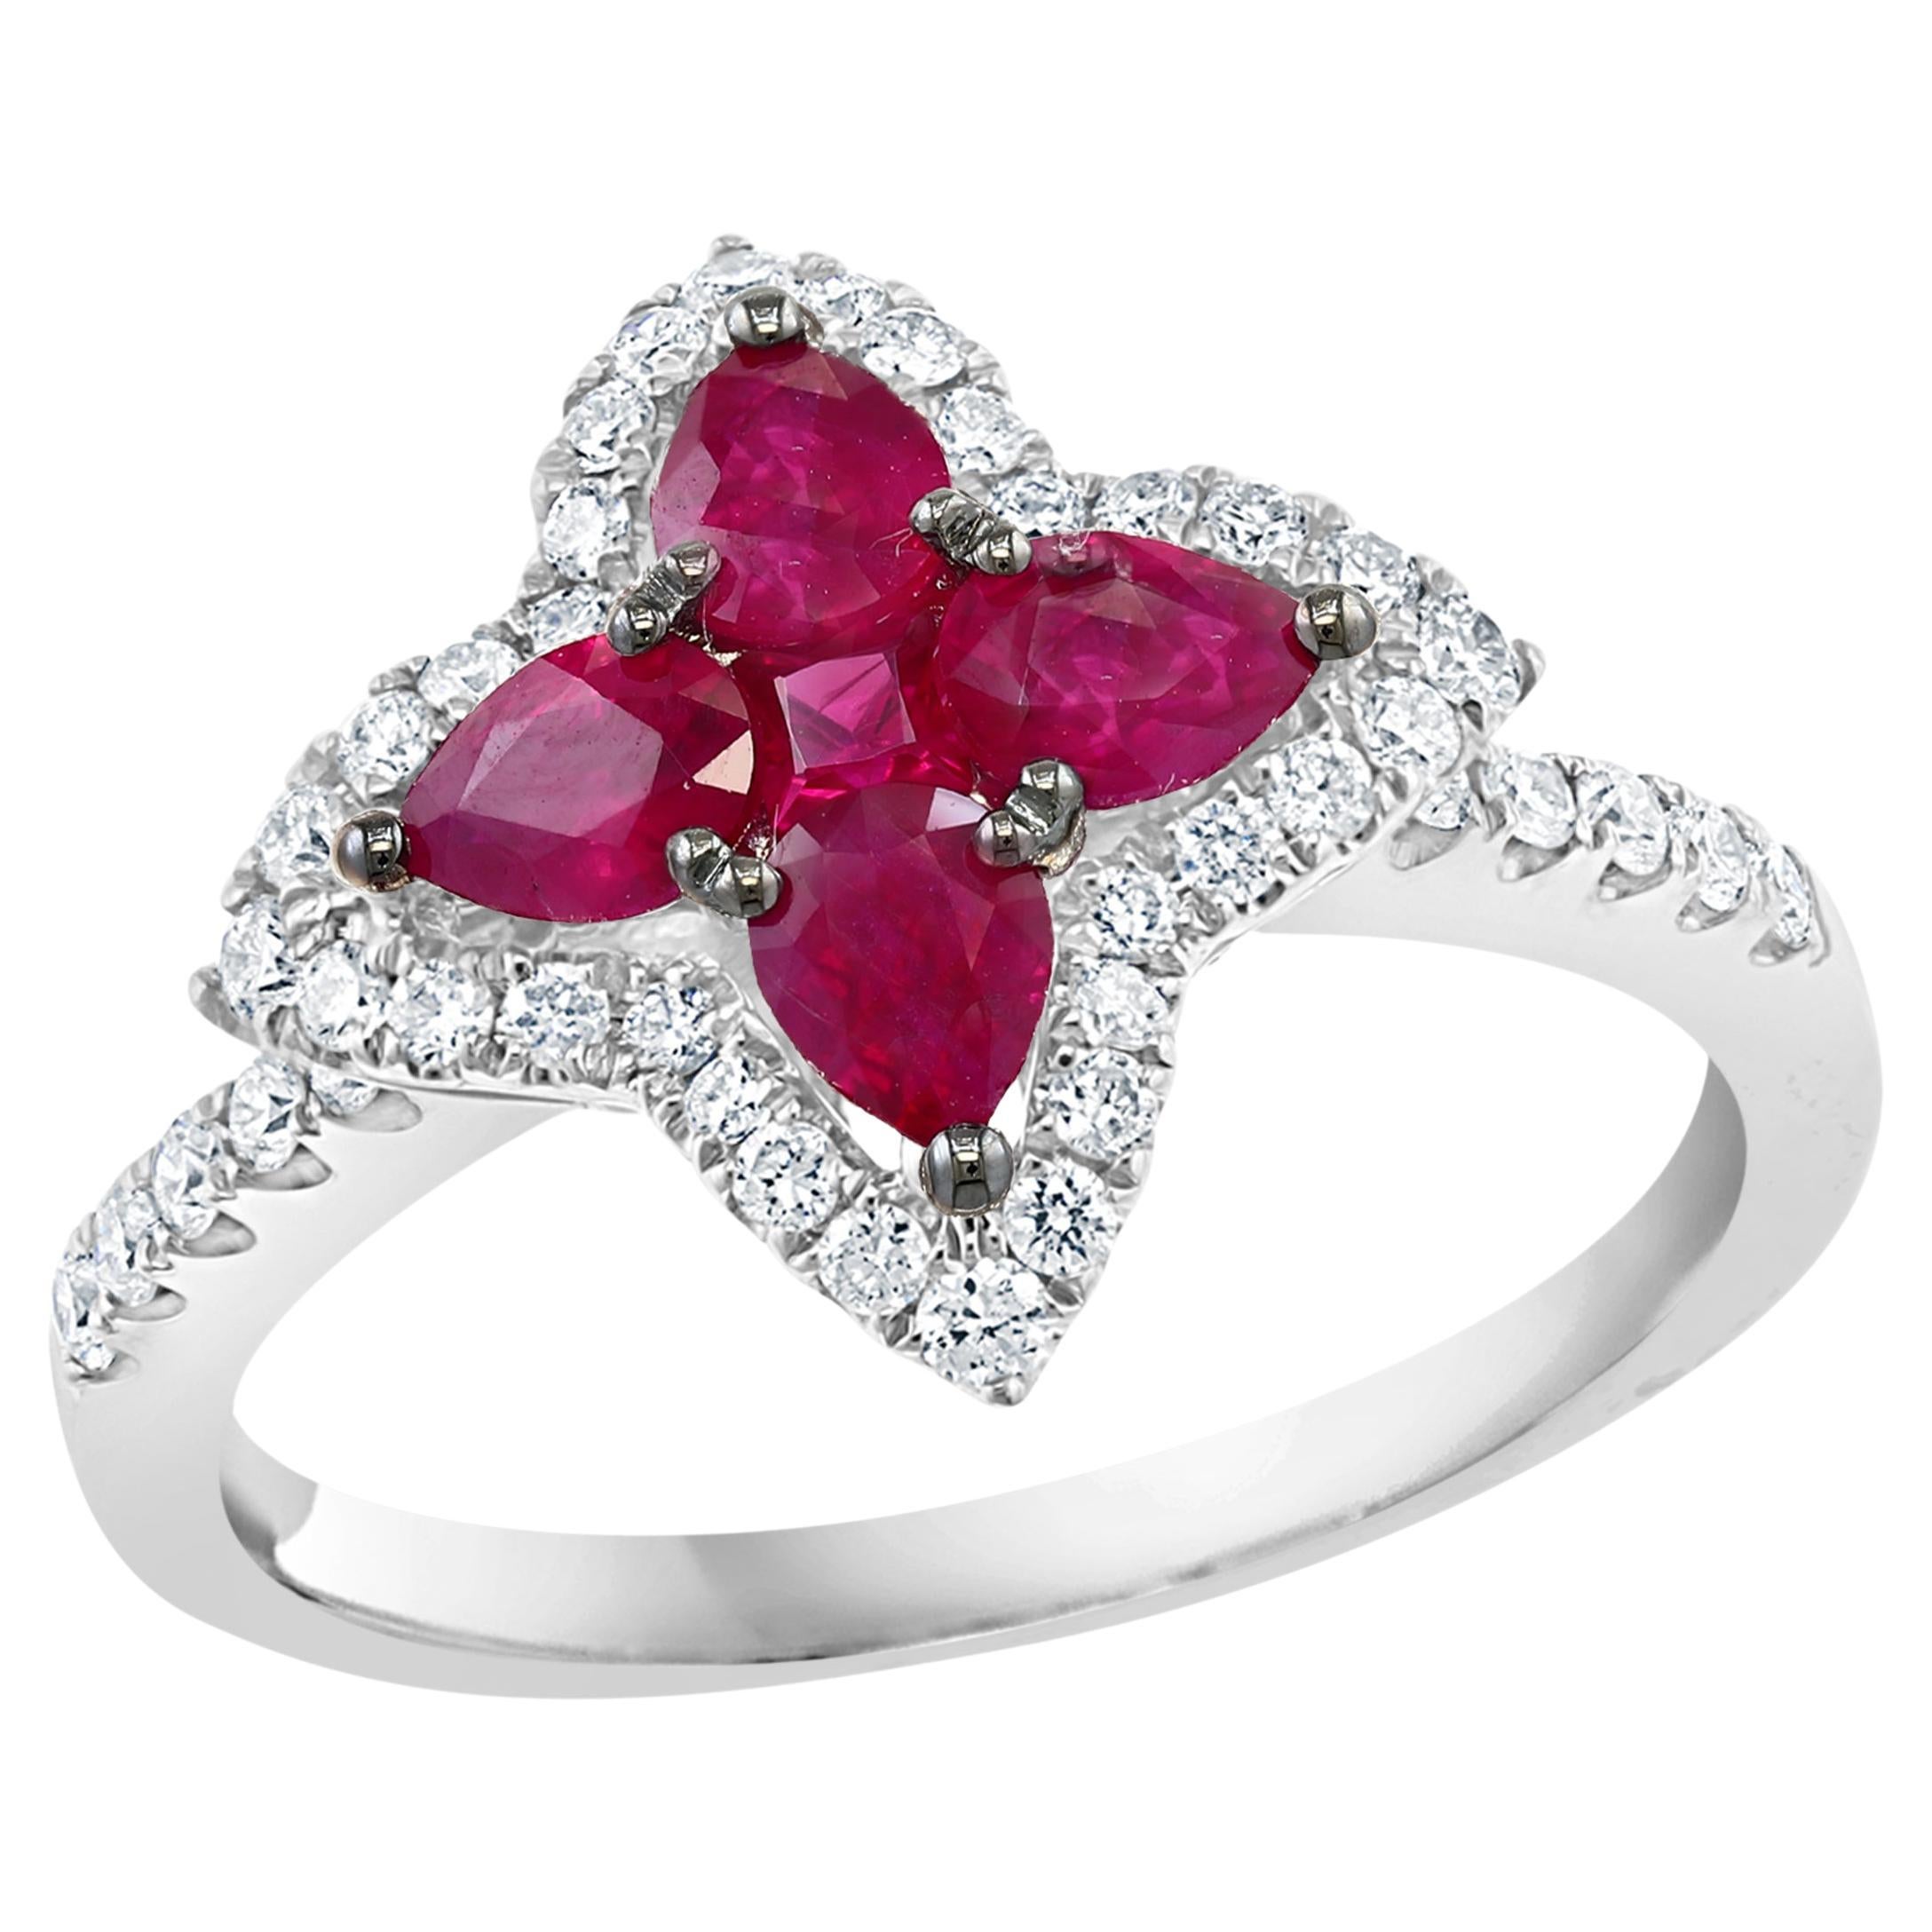 0.70 Carat Pear Shape Ruby and Diamond Cocktail Ring in 18K White Gold